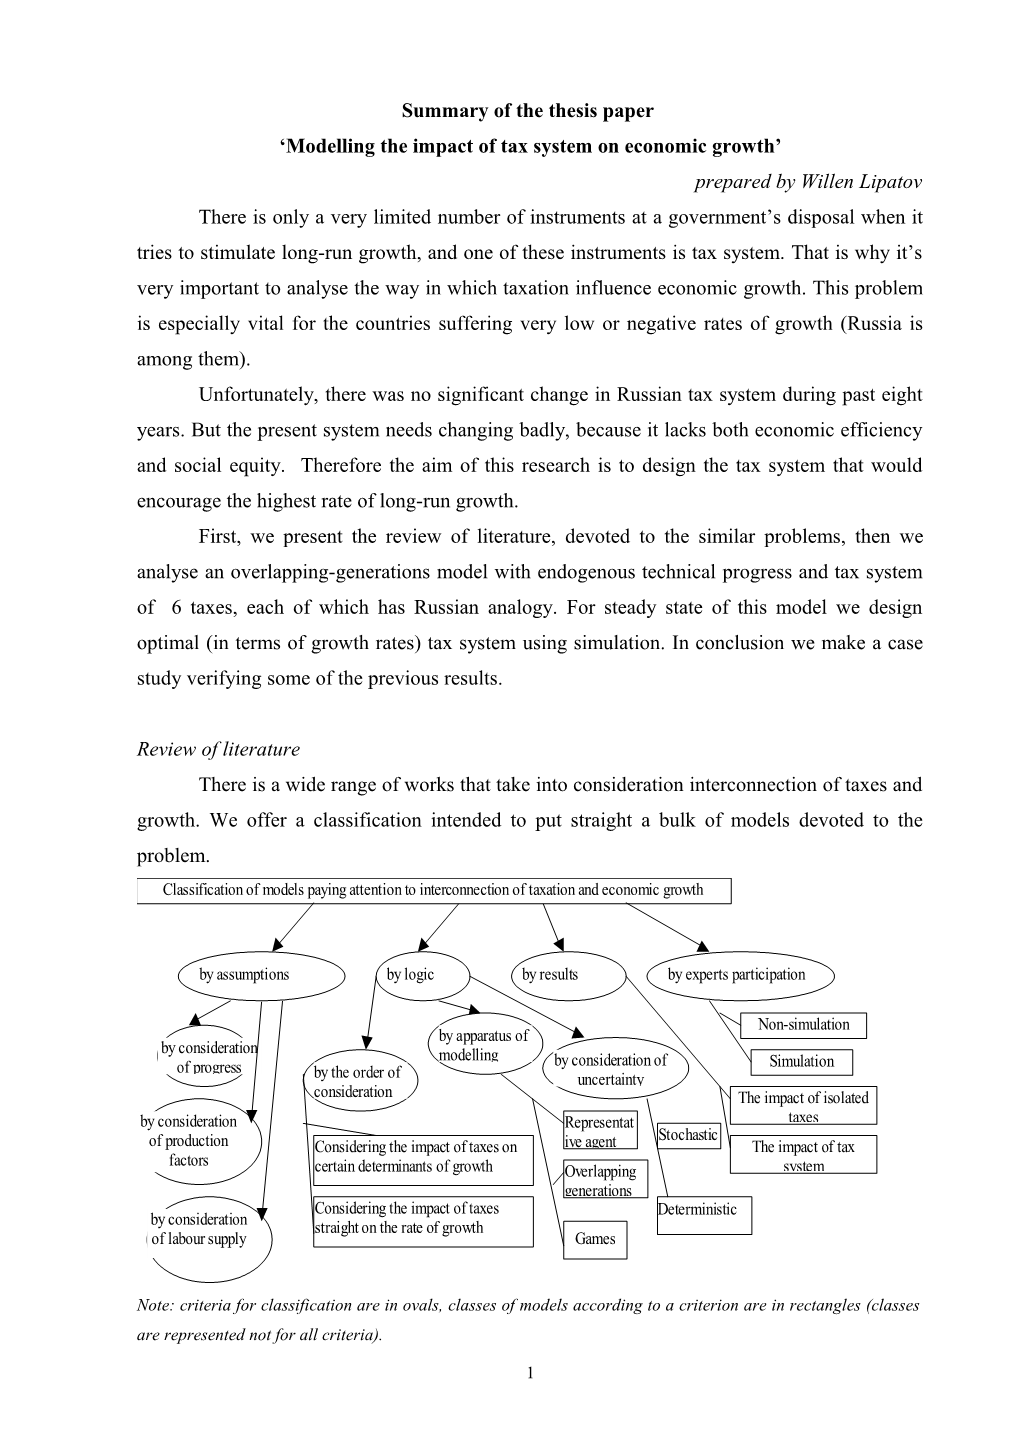 Summary of the Thesis Paper Modeling the Impact of Tax System on Economic Growth